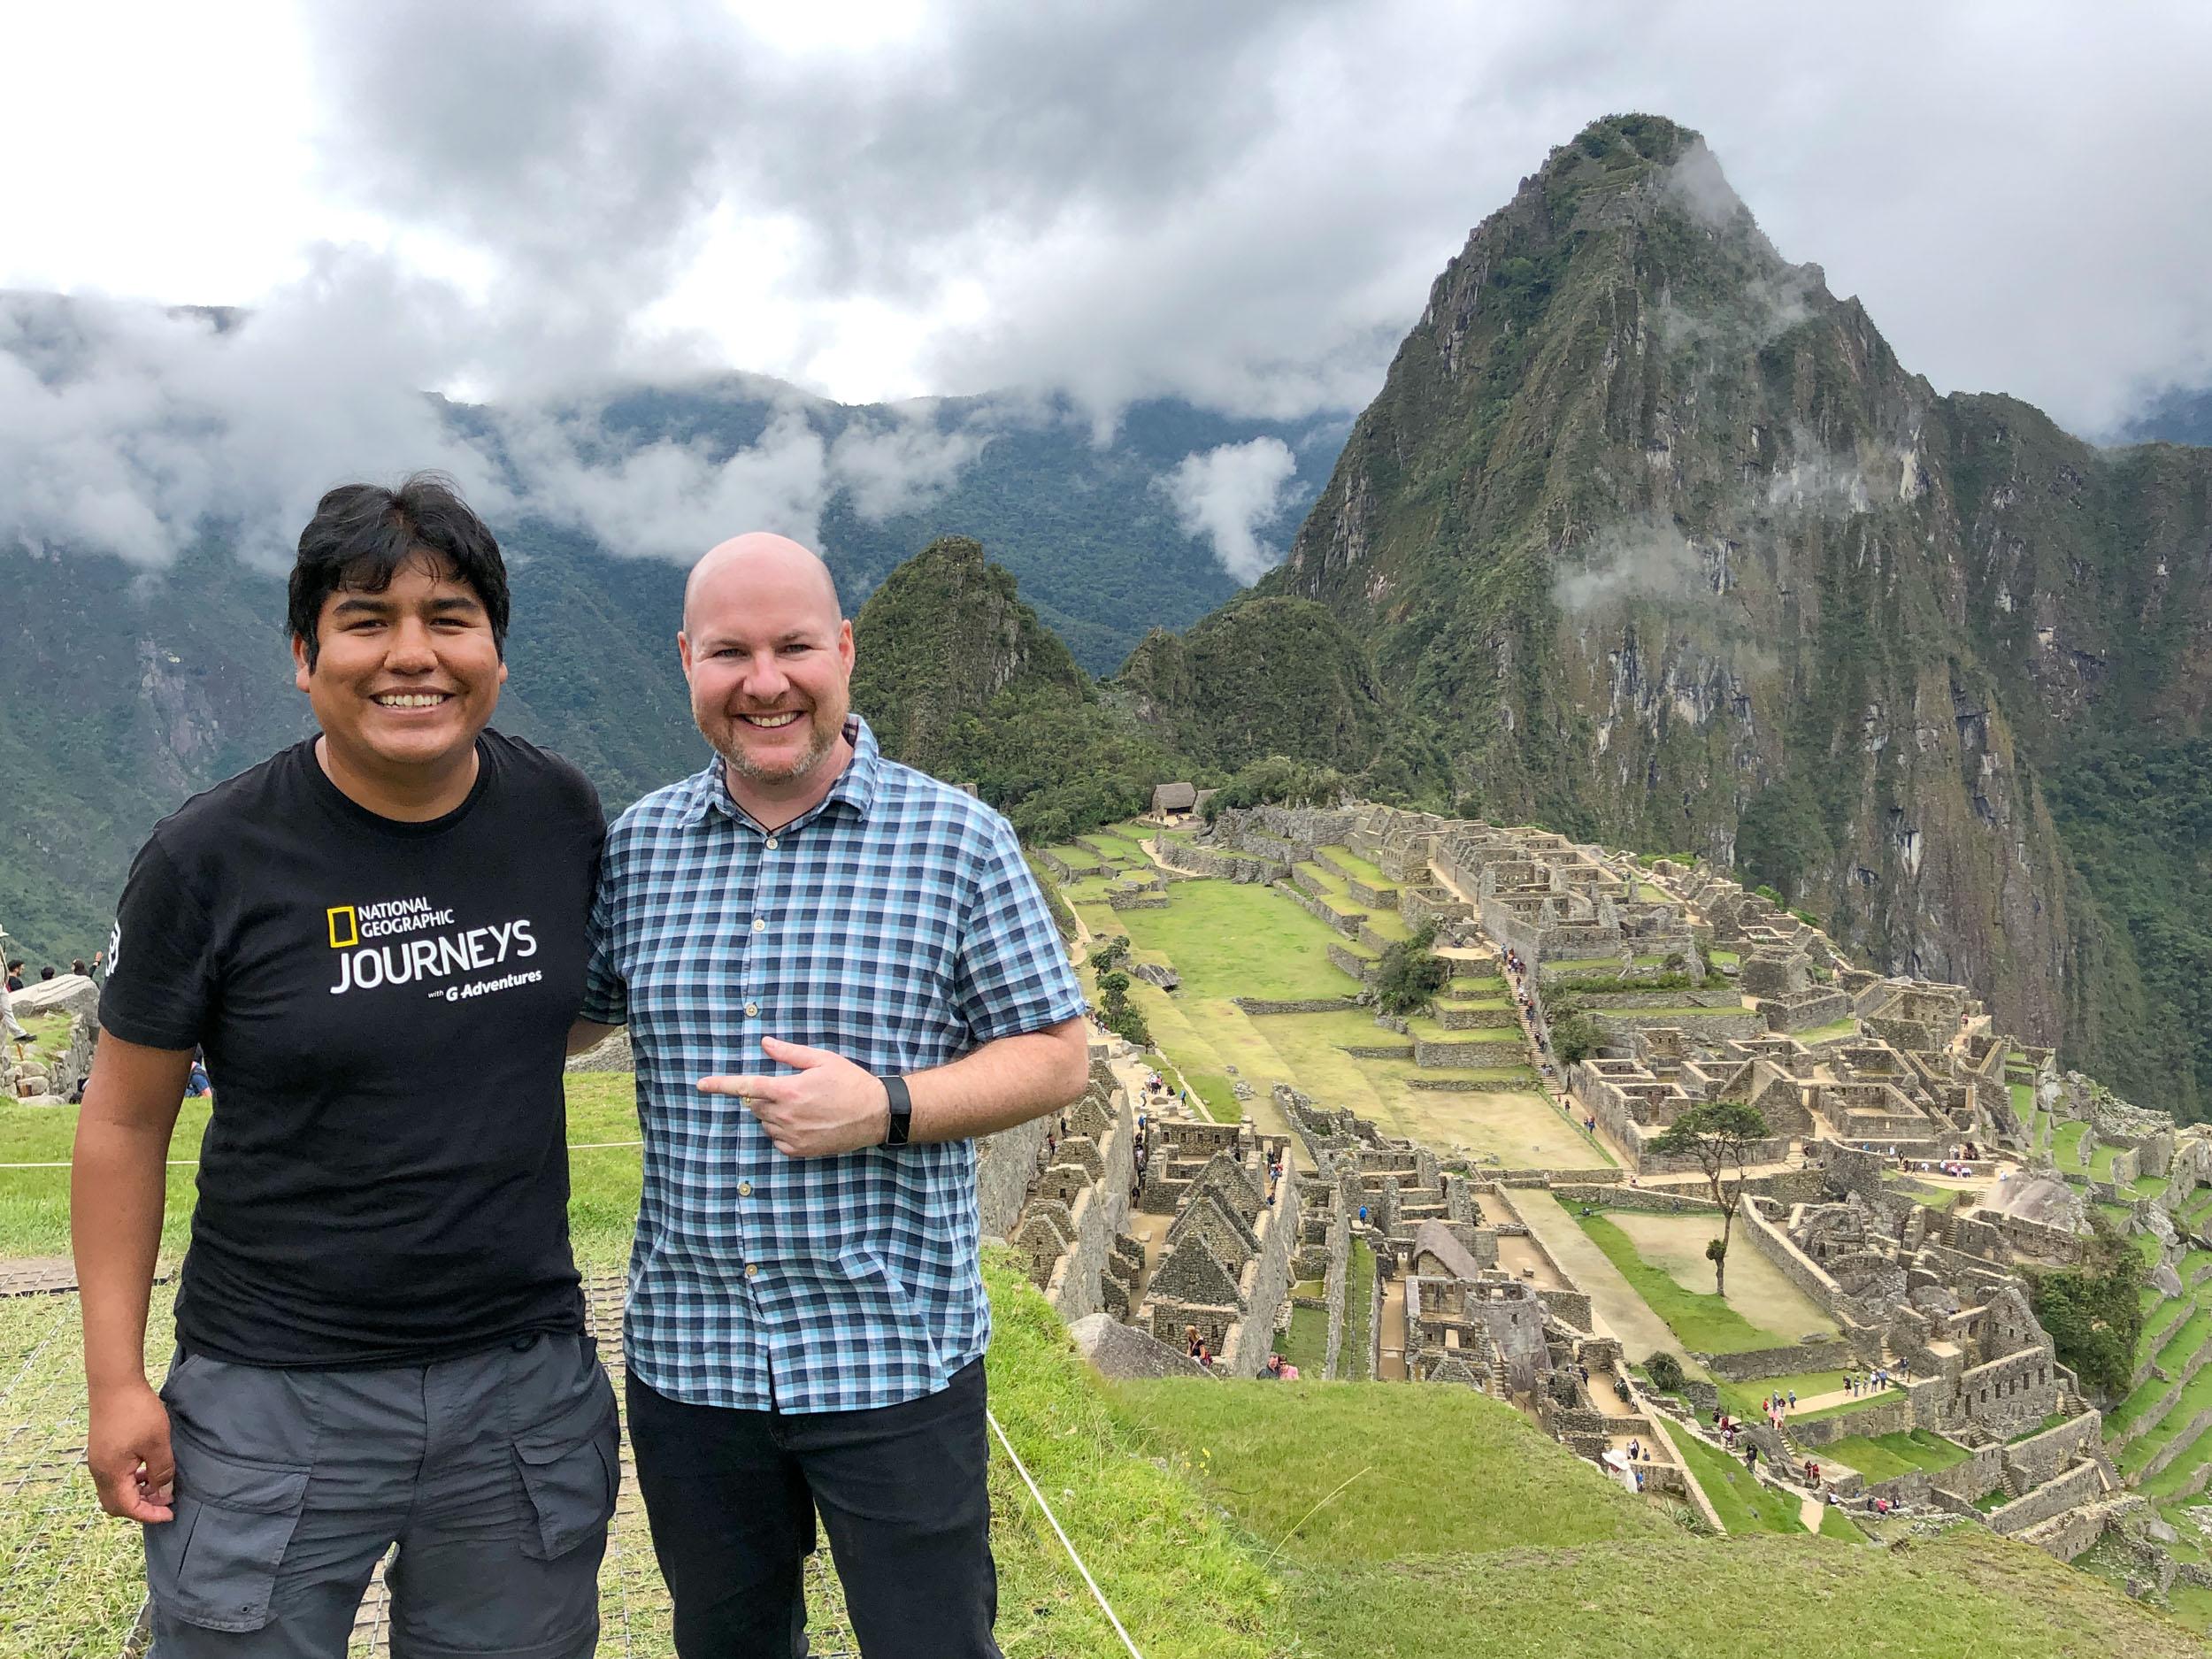 Returning to Machu Picchu was one of my best travel experiences of 2018